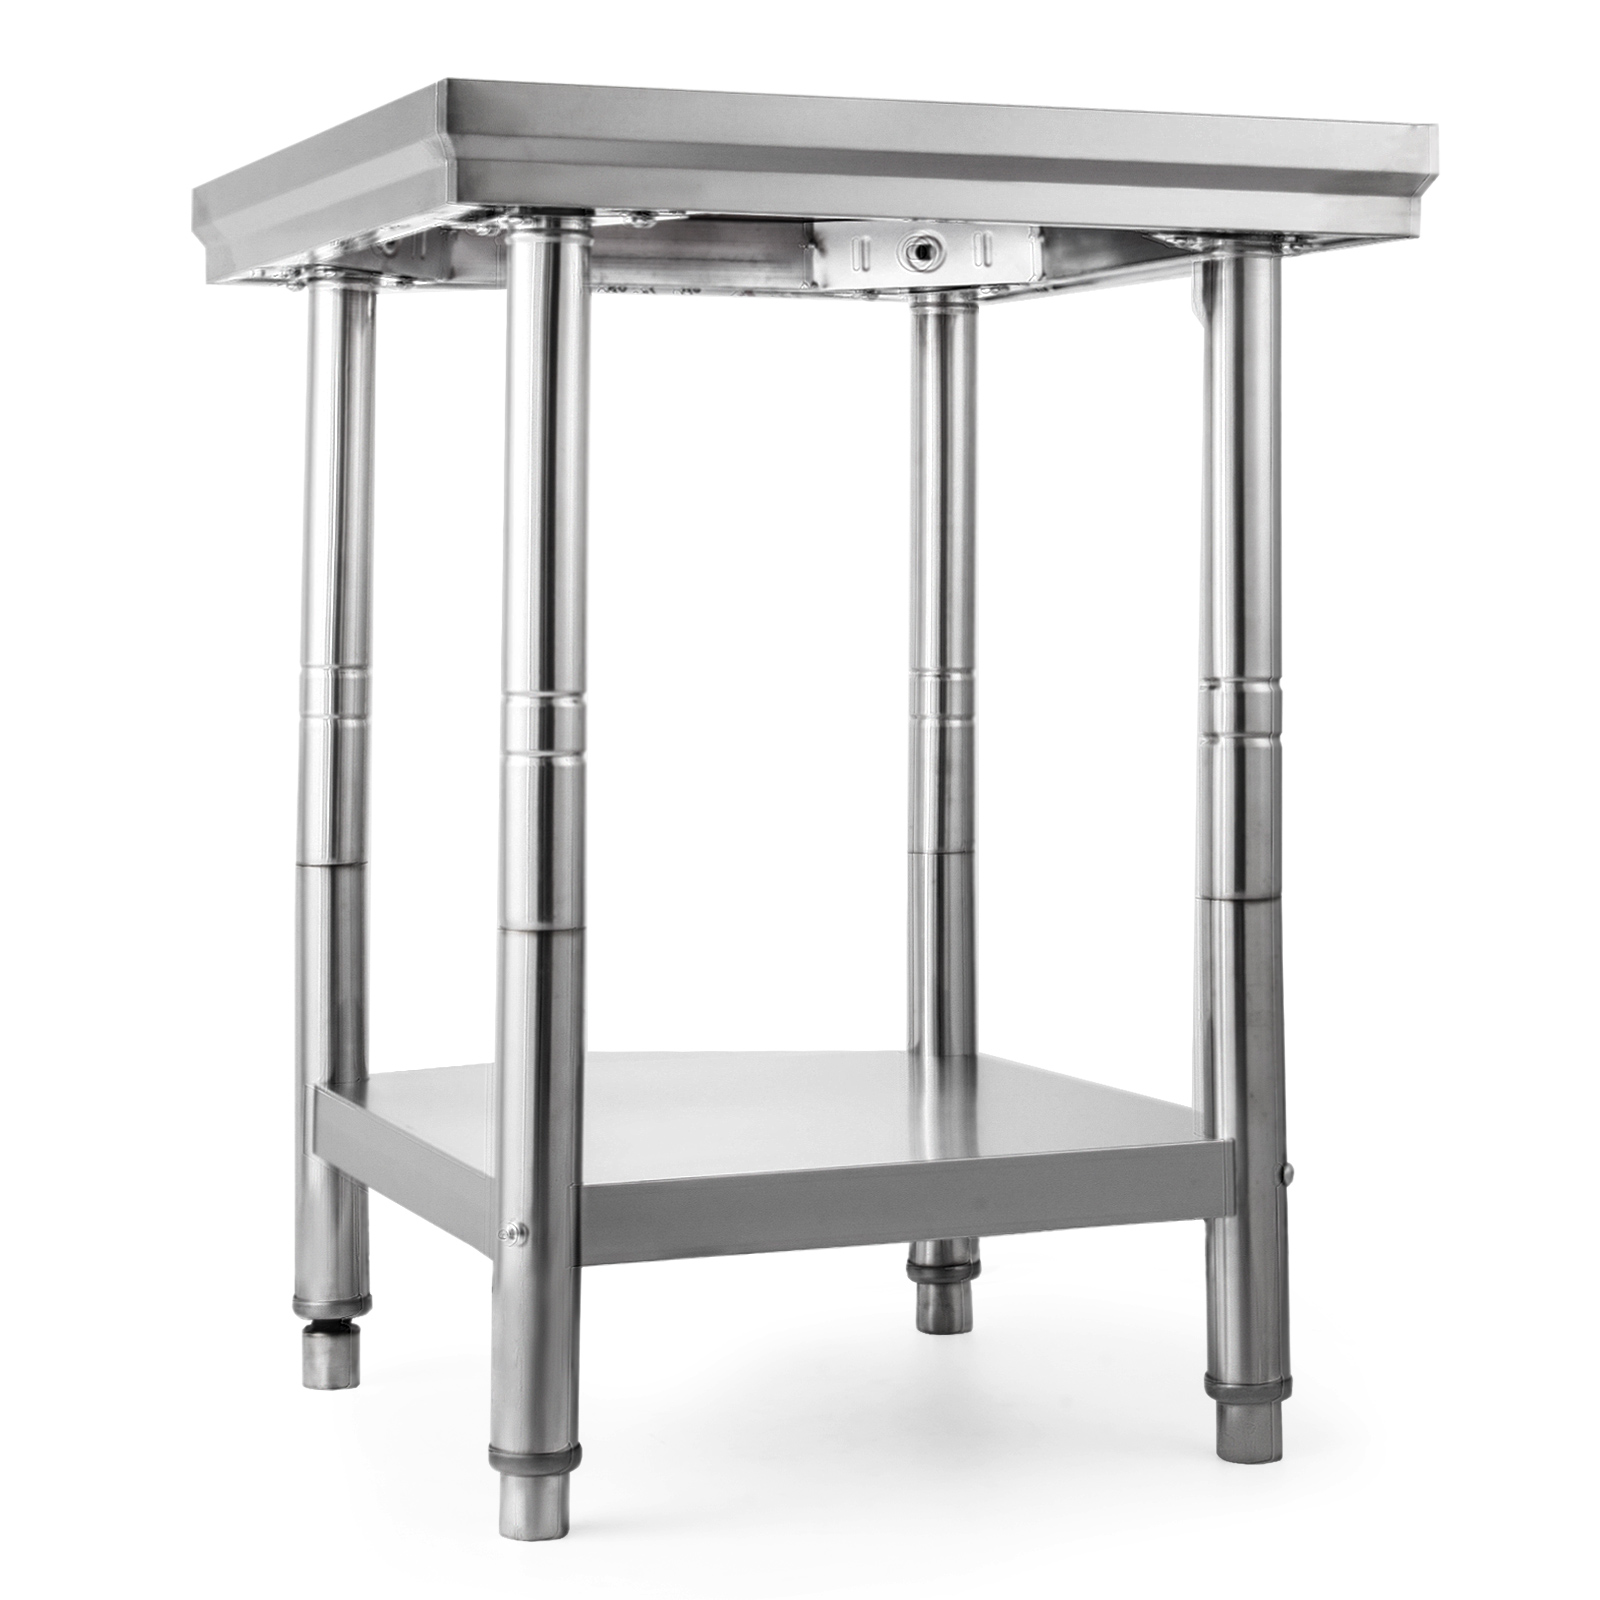 Stainless Steel Catering Table Work Bench Kitchen Back Splash Shelve All Sizes